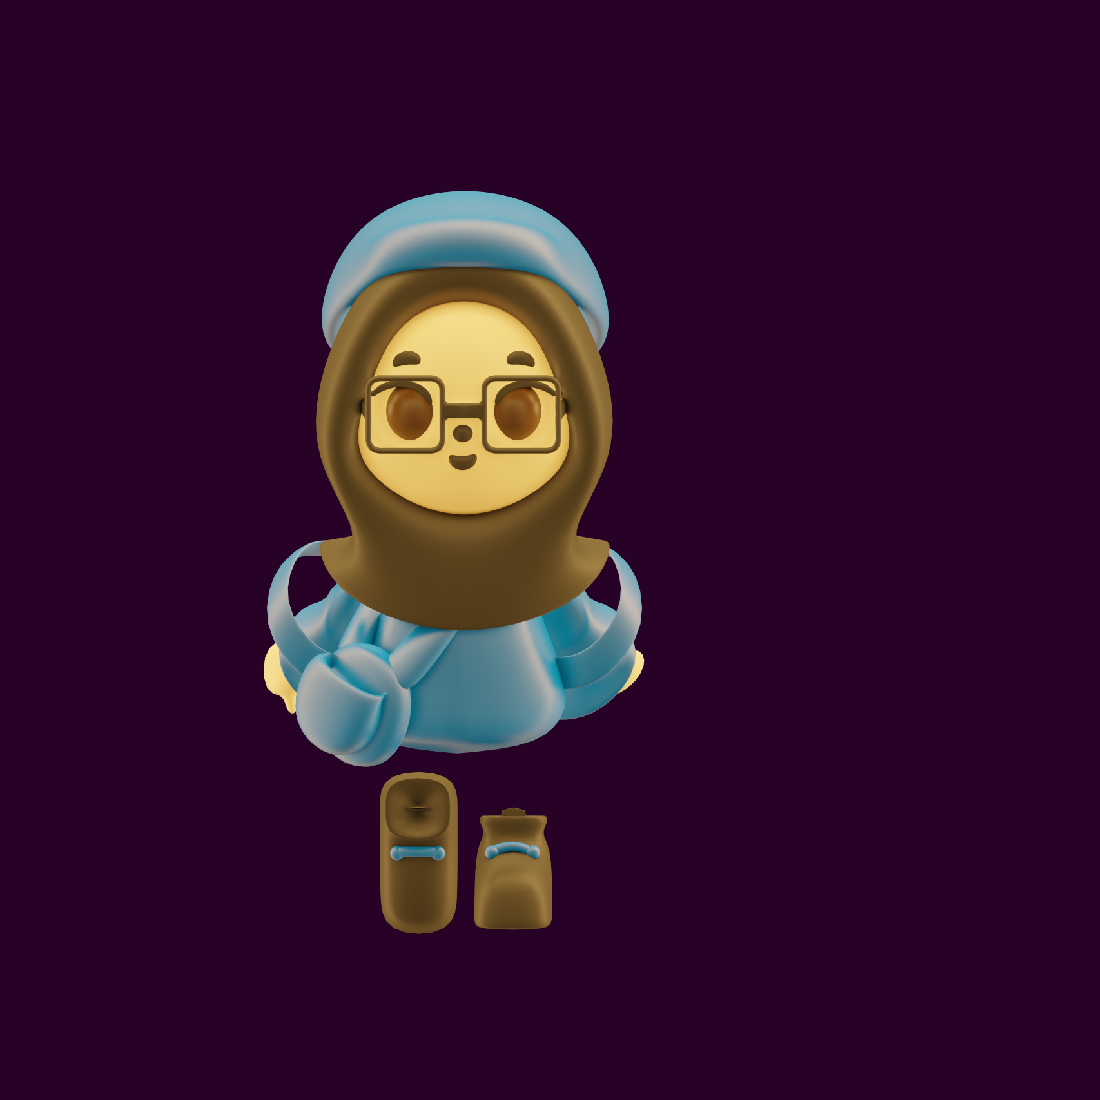 Cartoon character with glasses and a hoodie.